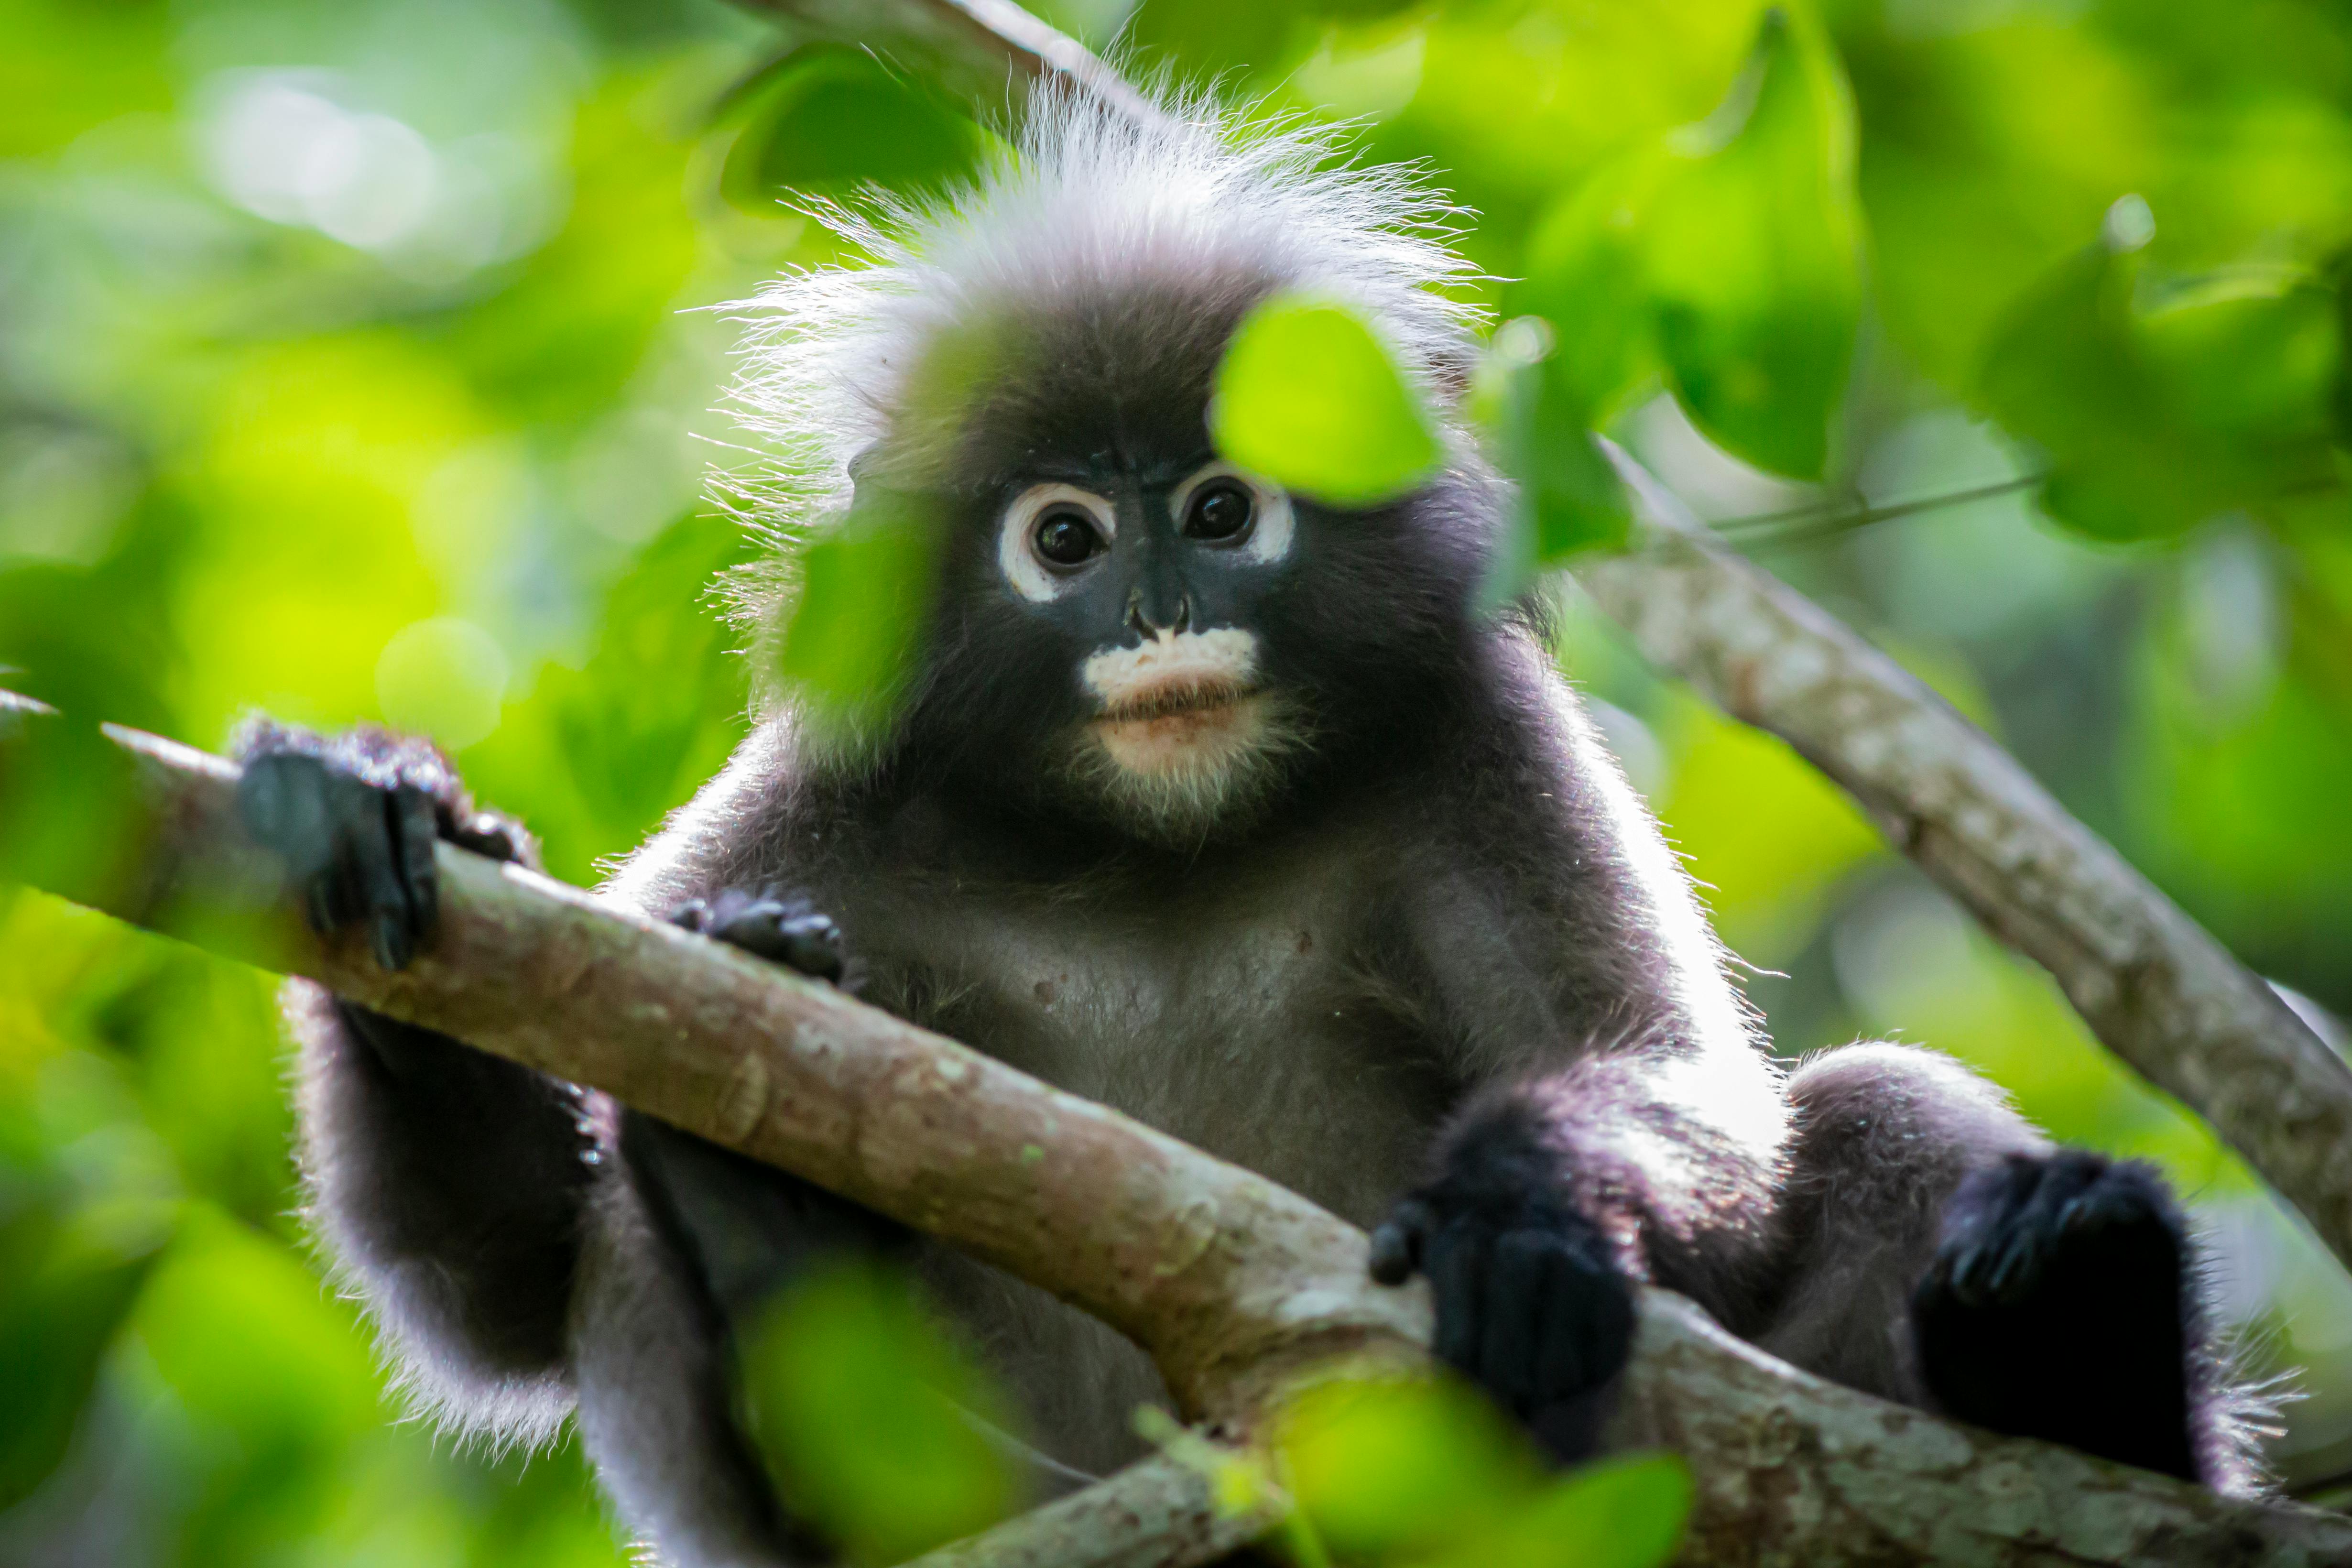 Dusky Leaf Monkey on Tree Branch in Close-up Photography · Free